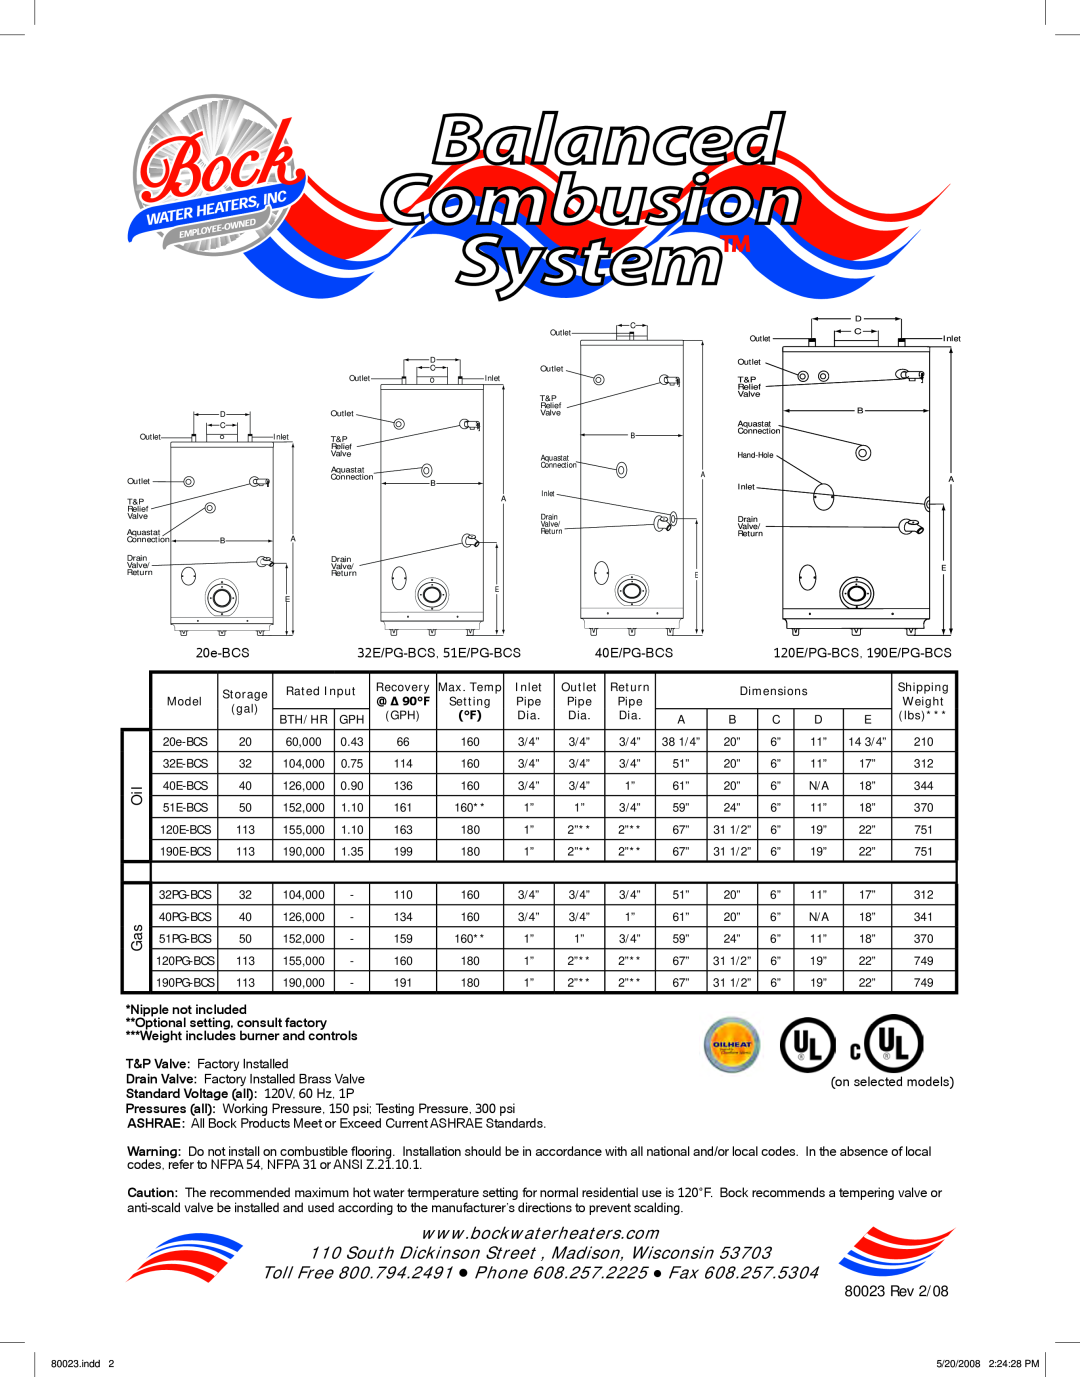 Bock Water heaters 40PG-BCS, 51E-BCS Balanced Combusion System, South Dickinson Street , Madison, Wisconsin, Rev 2/08 